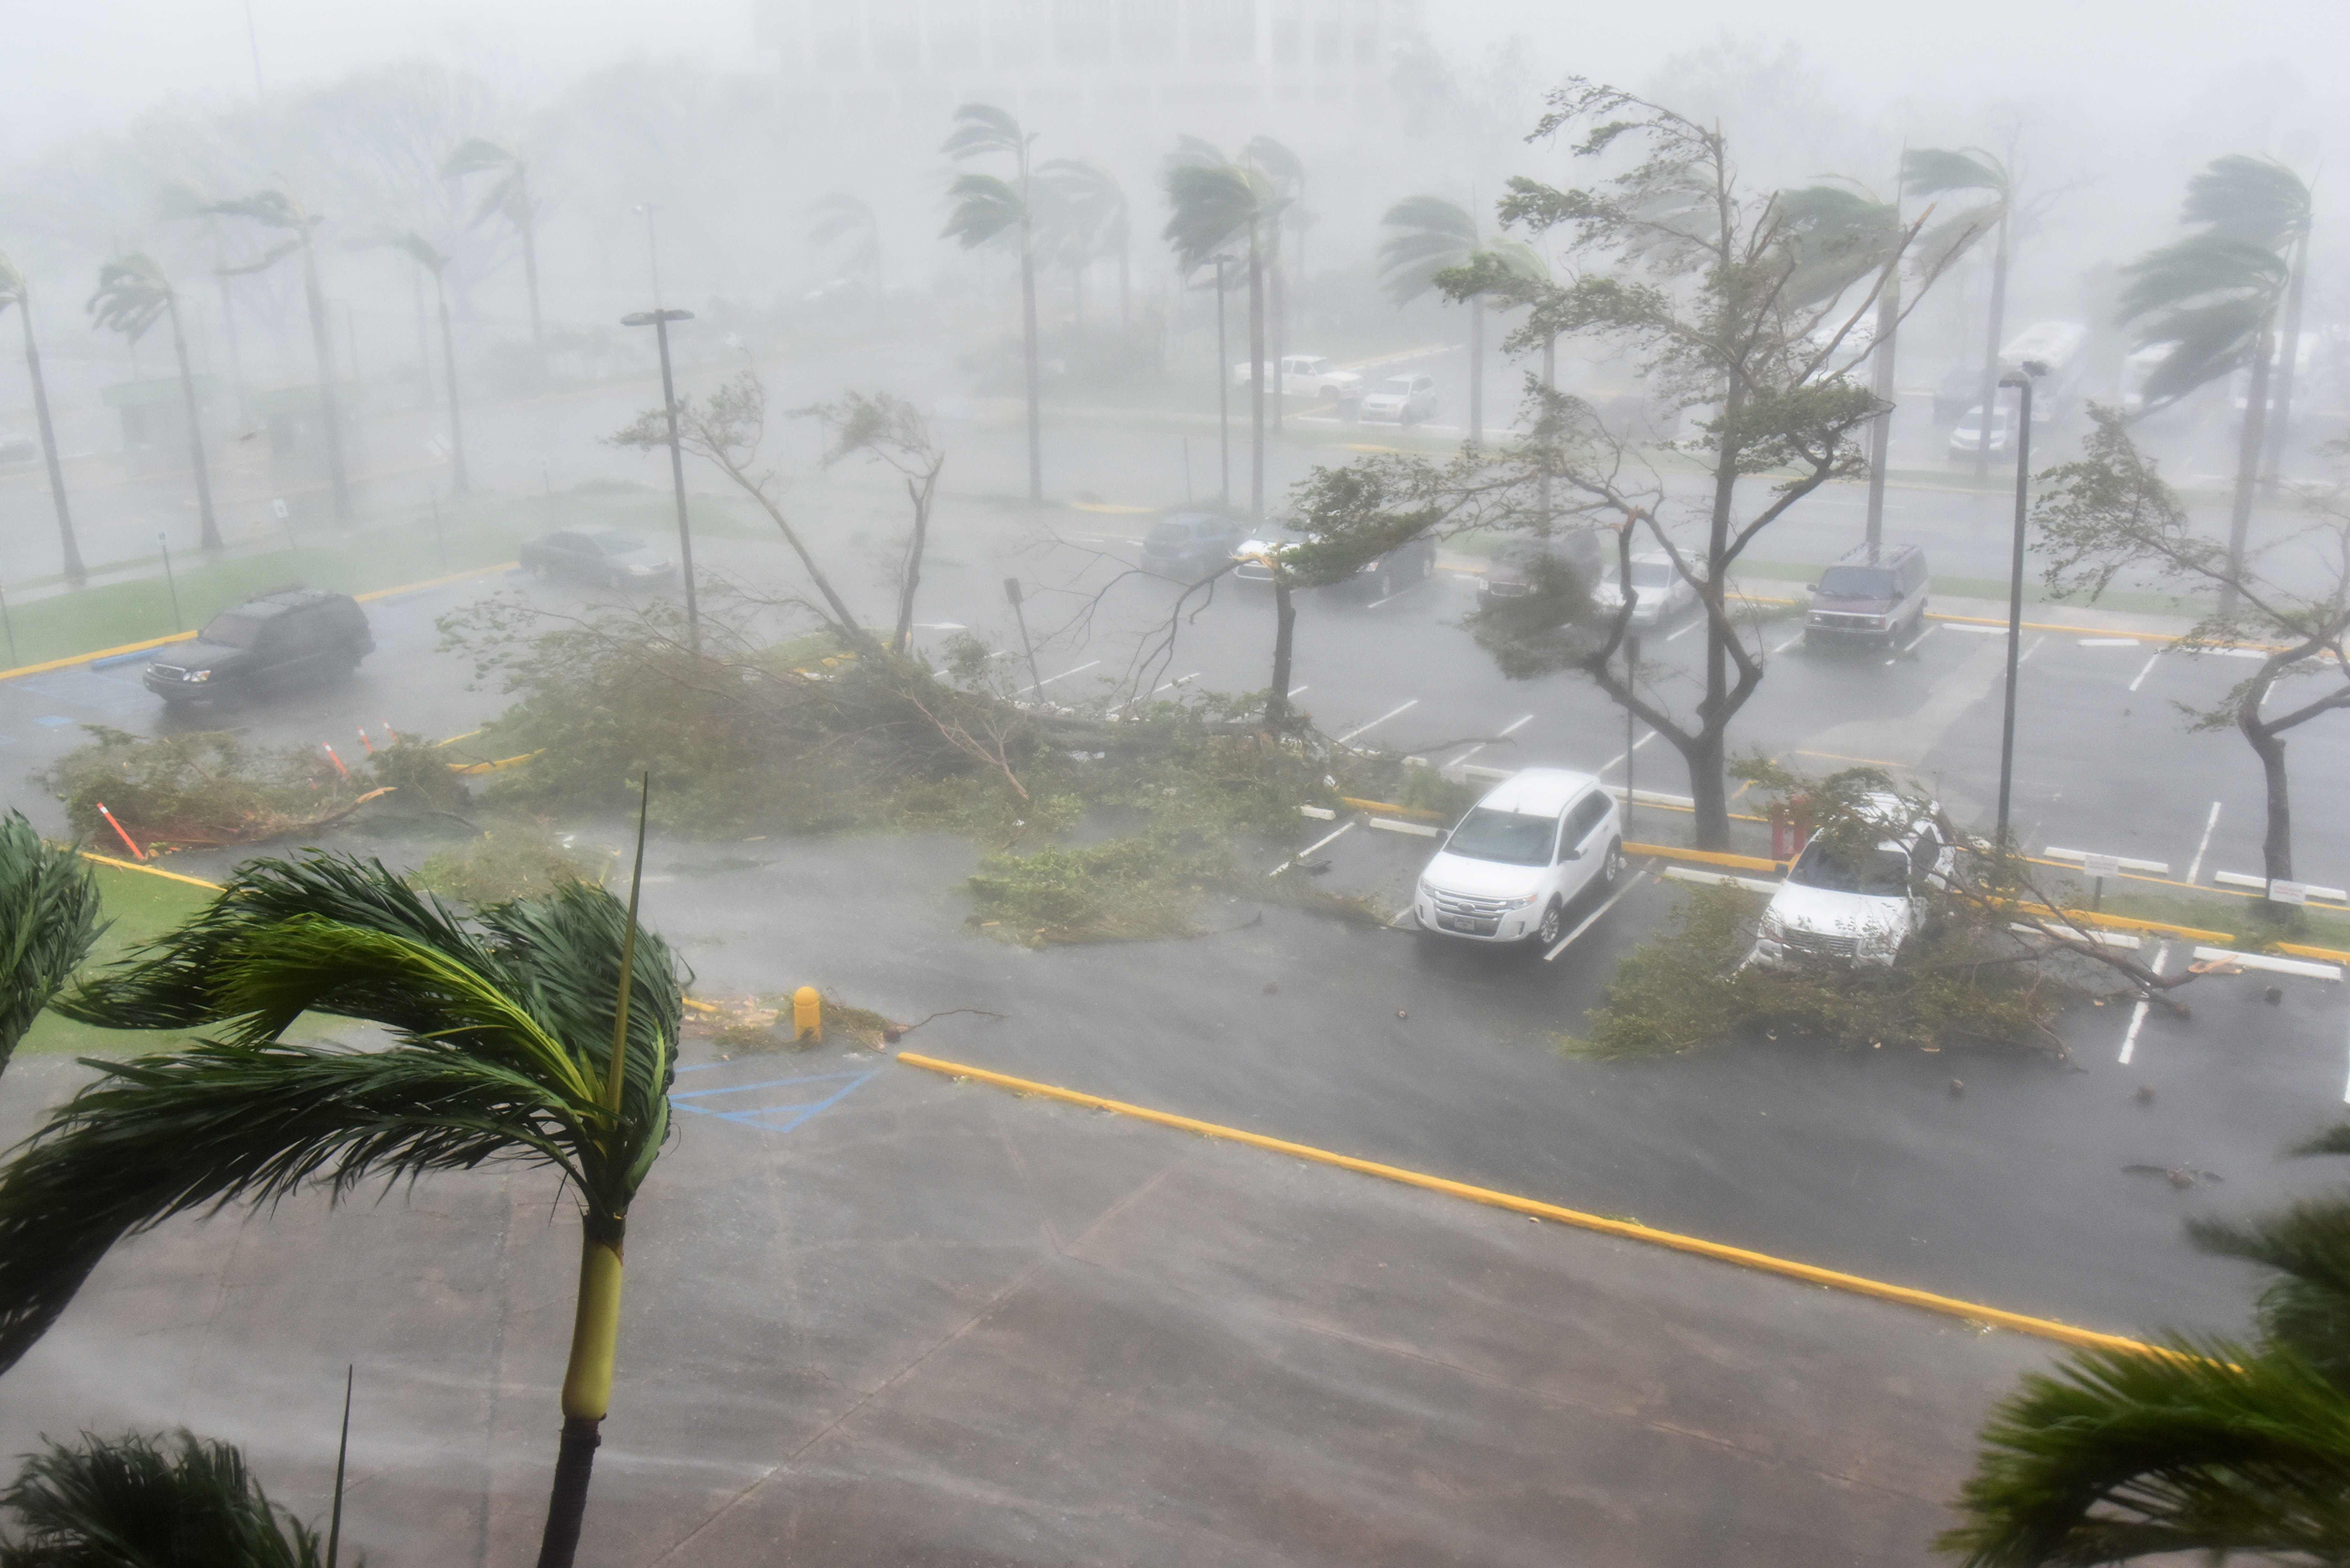 Trees are toppled in a parking lot at Roberto Clemente Coliseum in San Juan, Puerto Rico, on Sept. 20, 2017. (Hector Retamal—AFP/Getty Images)